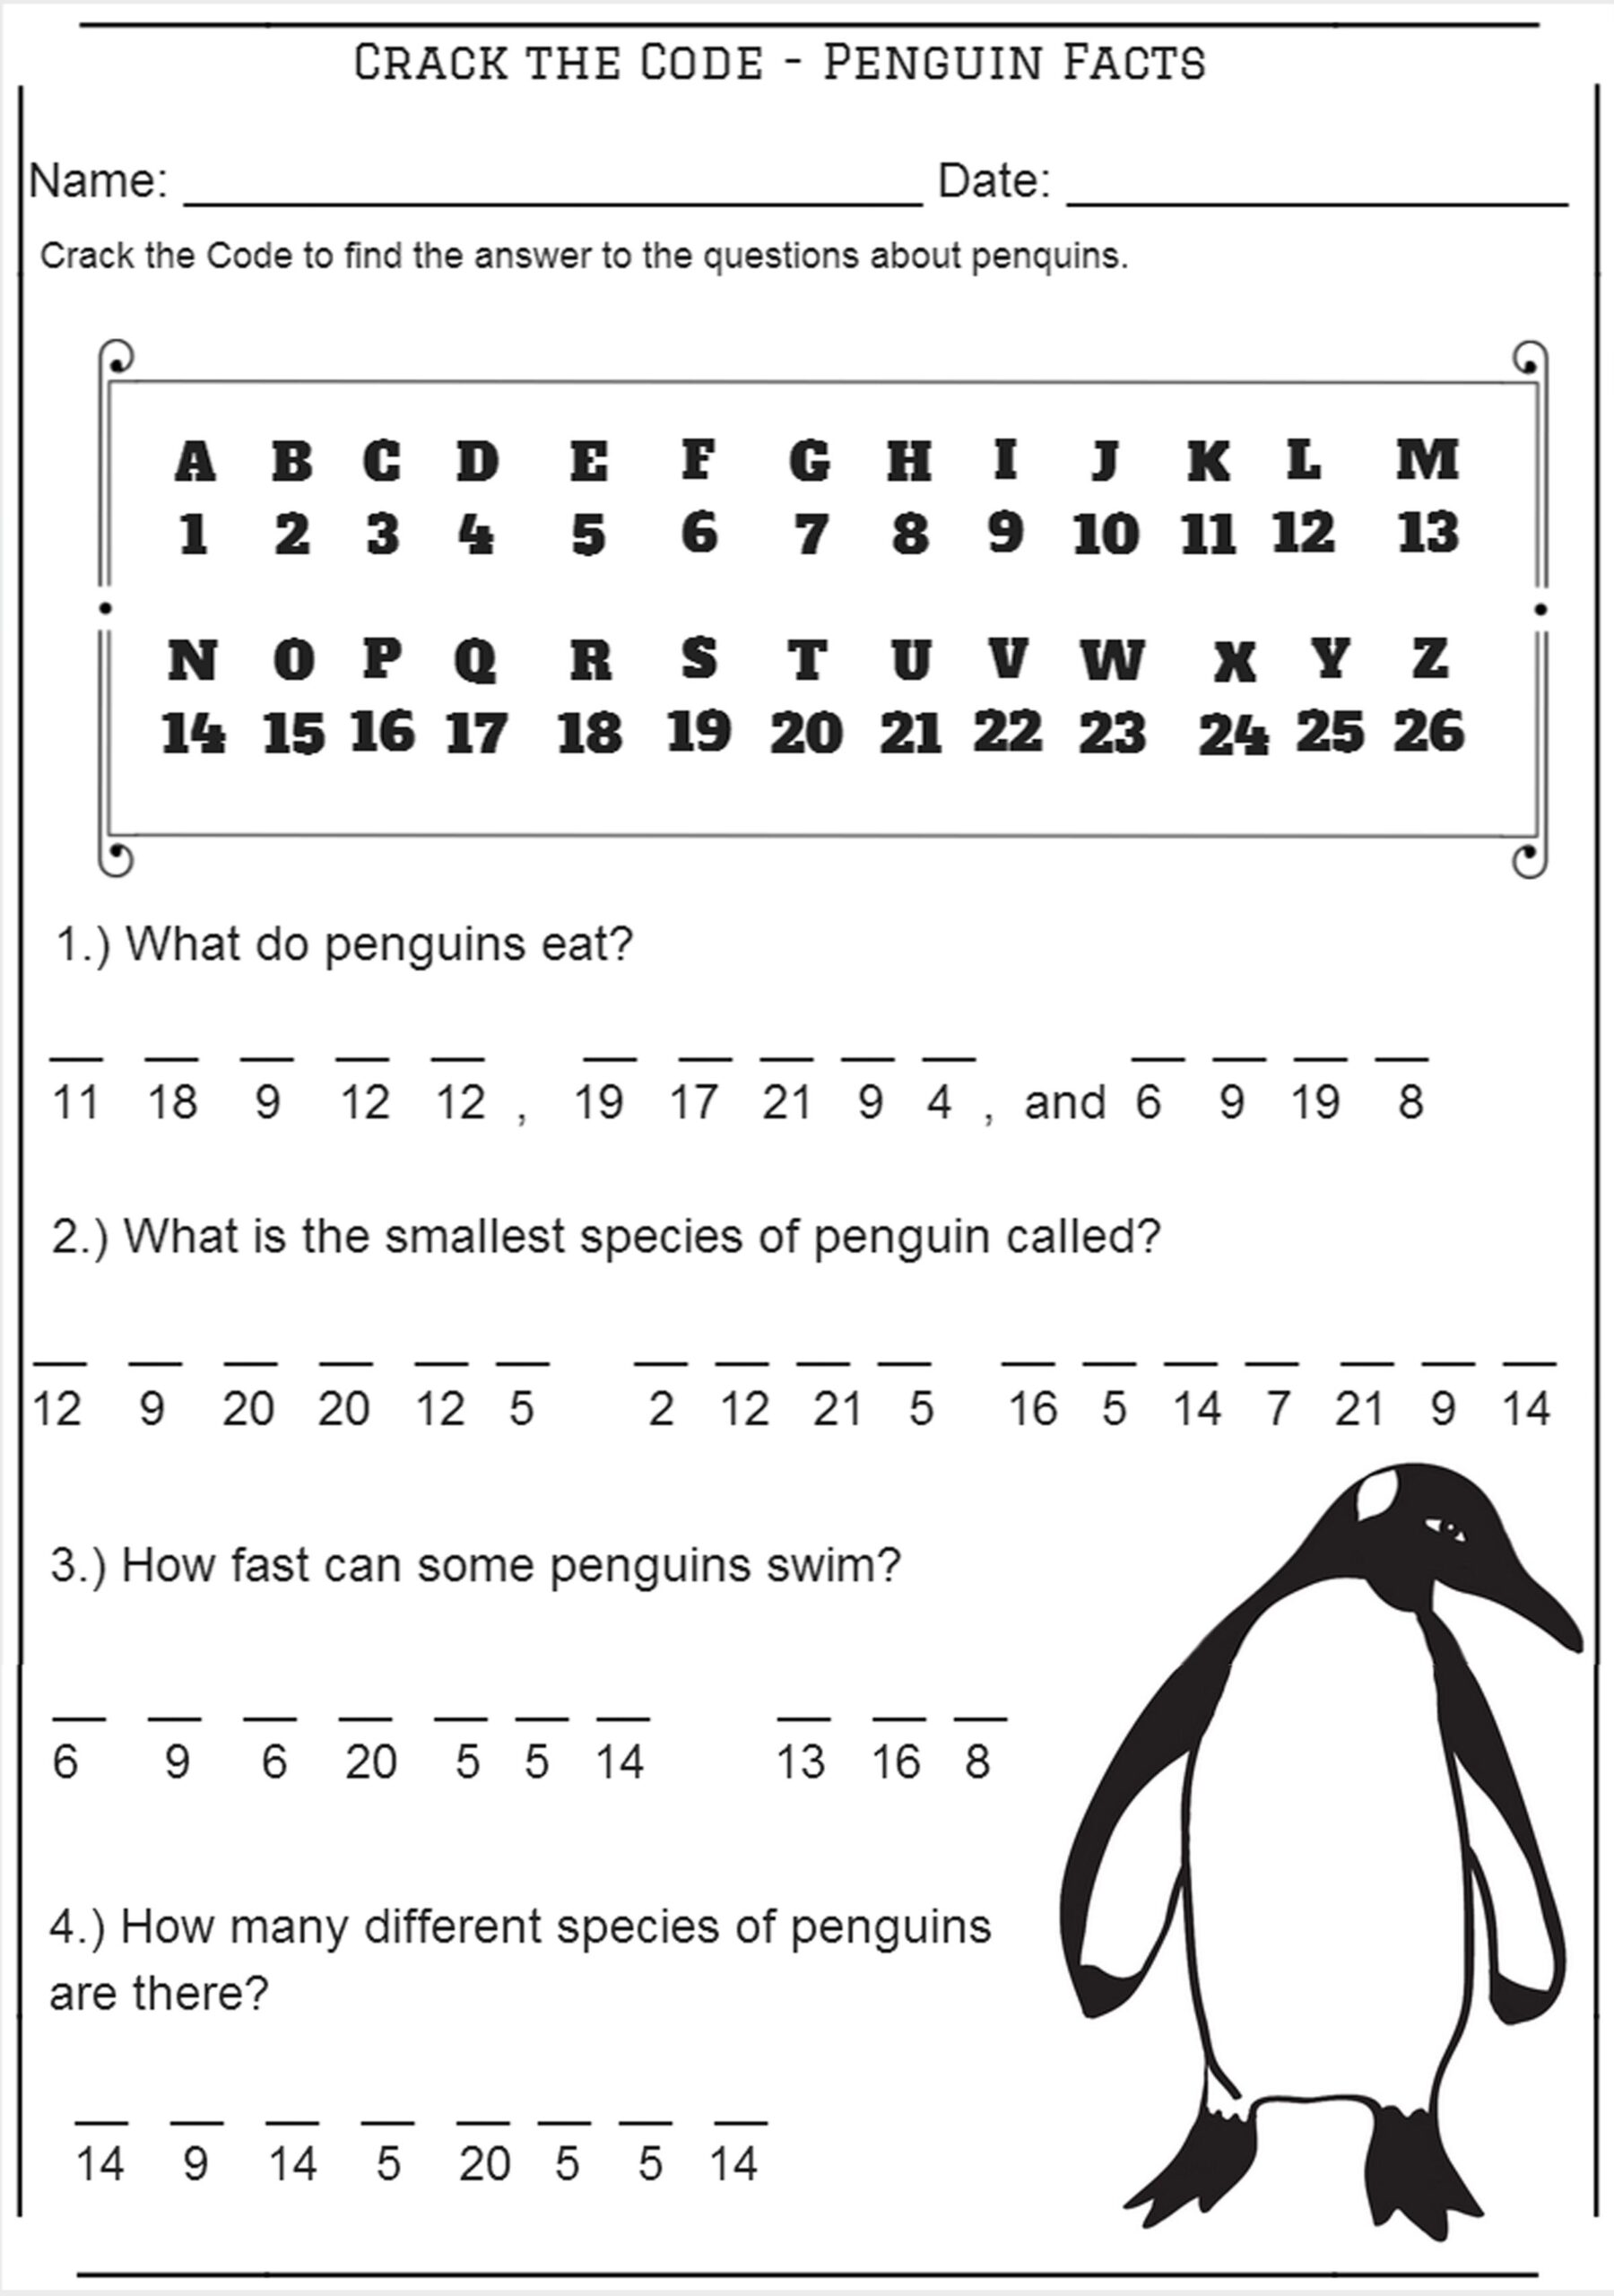 Pin On FREE Worksheets For Kids - Crack The Code Worksheets Printable Free